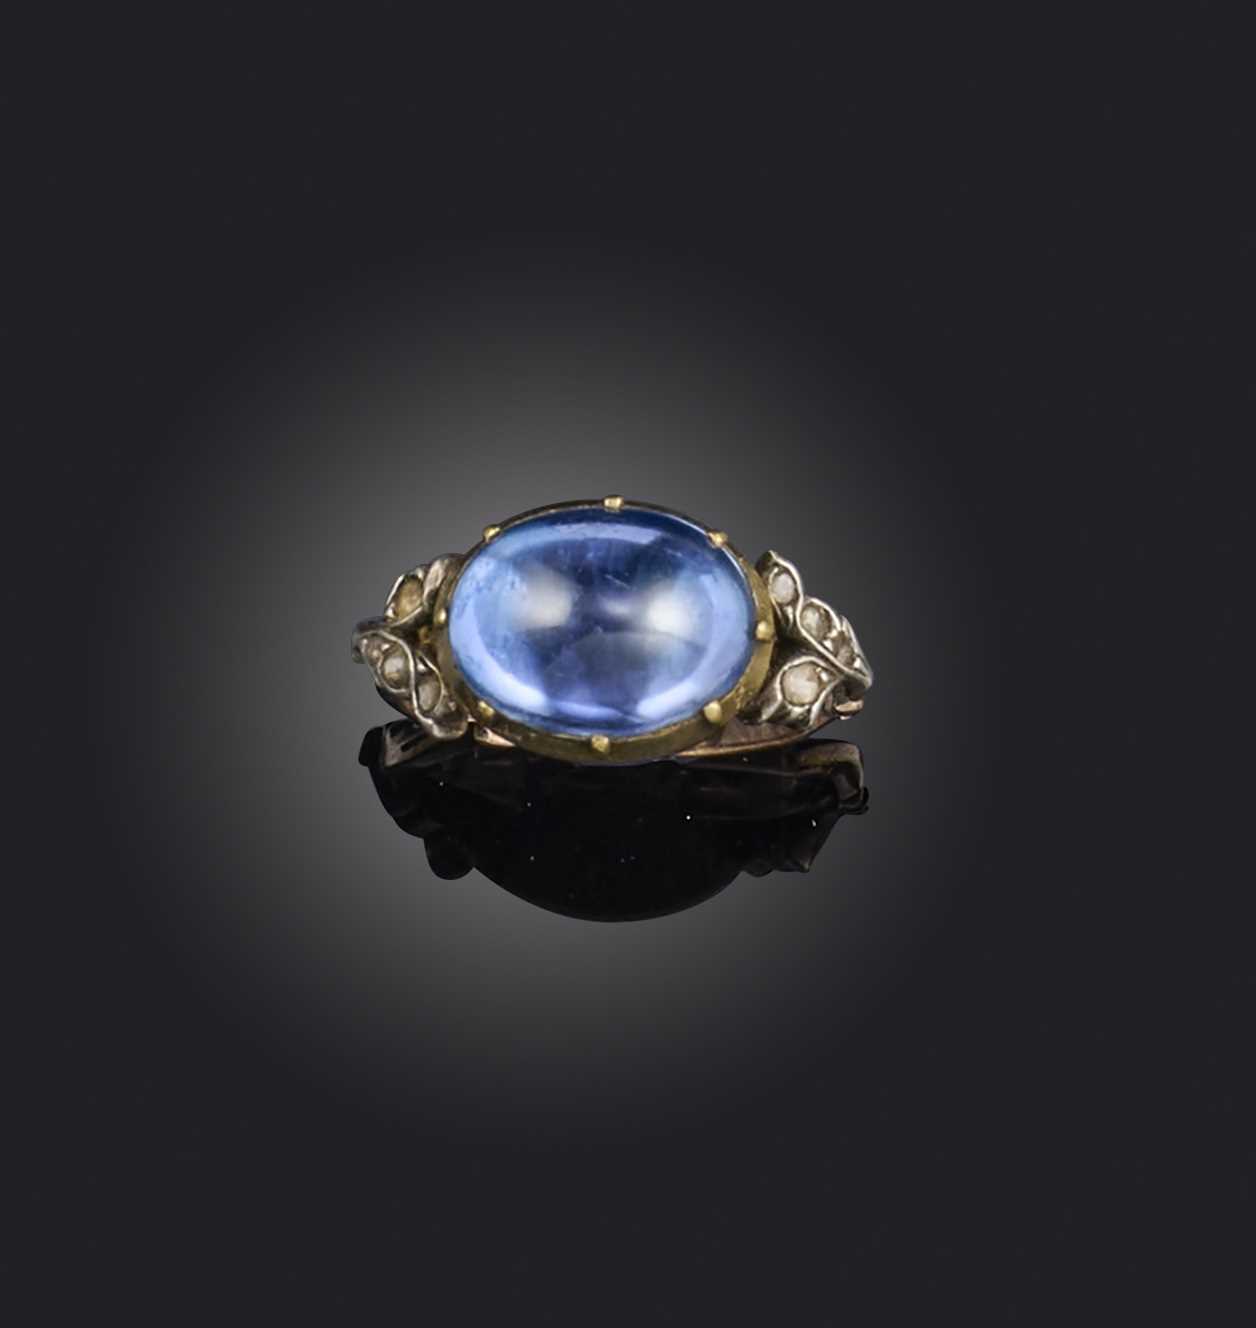 A sapphire and diamond ring, late 18th century composite, set with a cabochon sapphire within